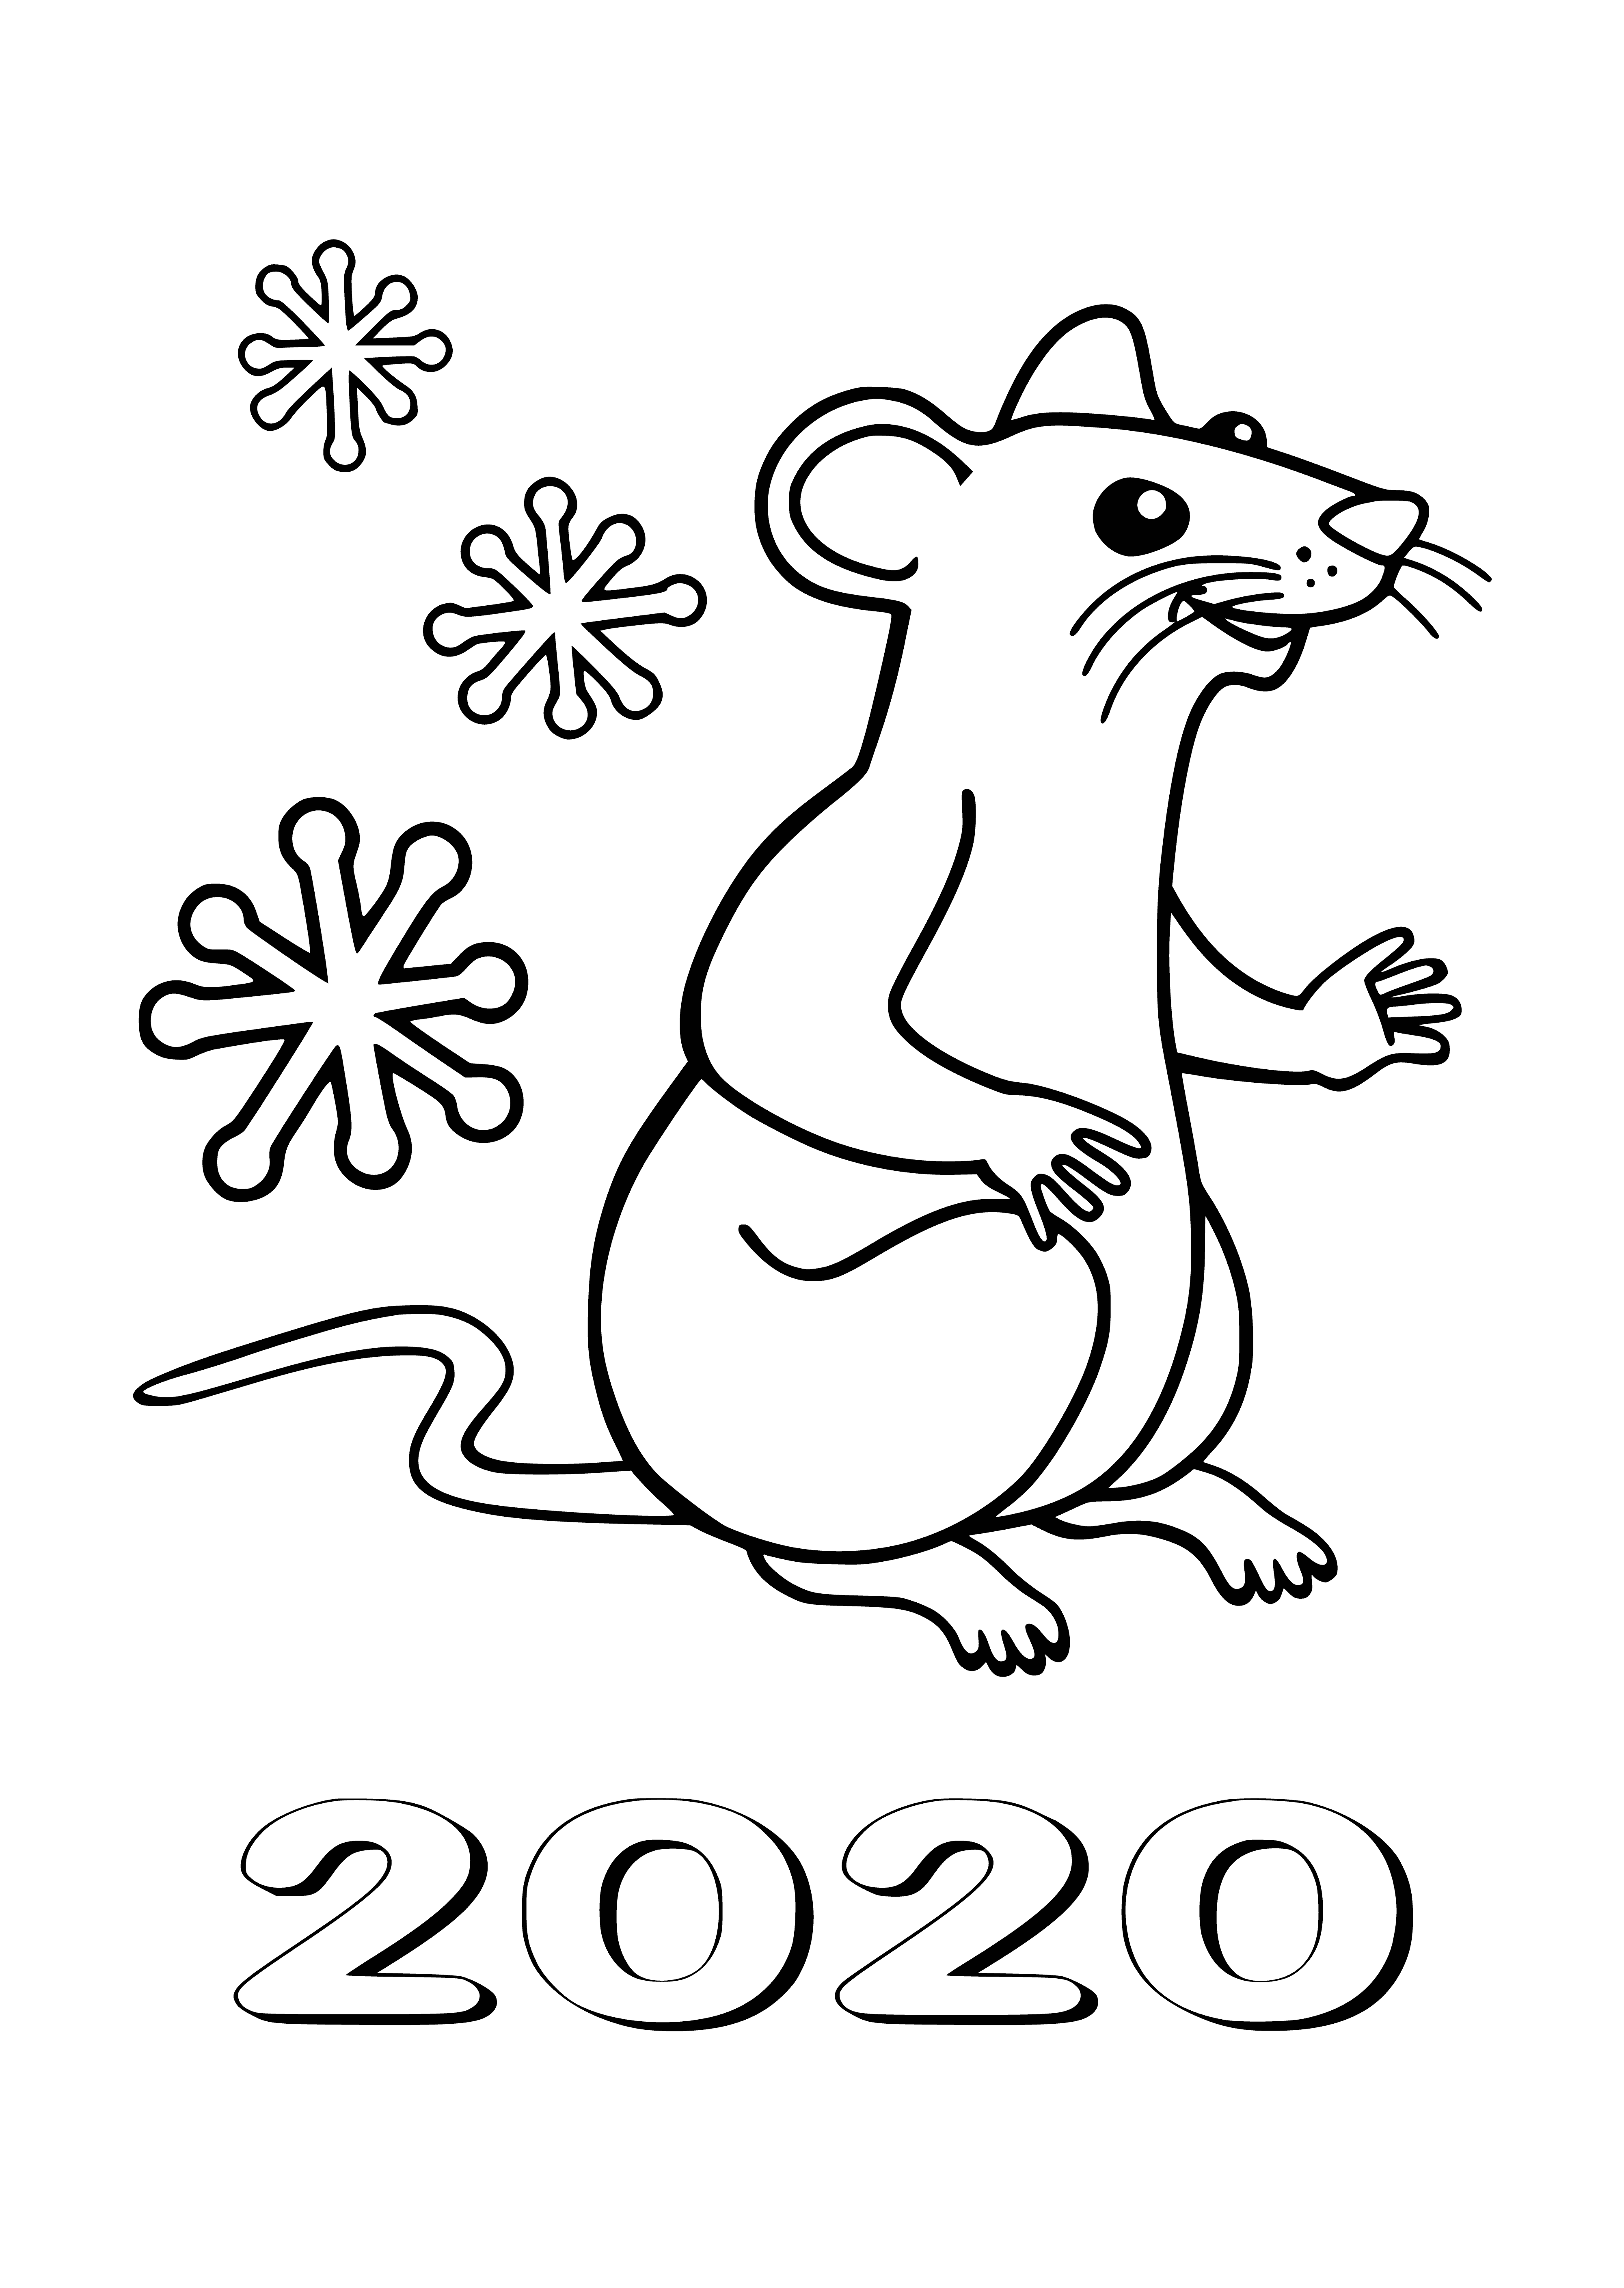 coloring page: Colorful rat on page symbolizes "Year of the Rat" - Chinese characters above & words below illustrate the scene.